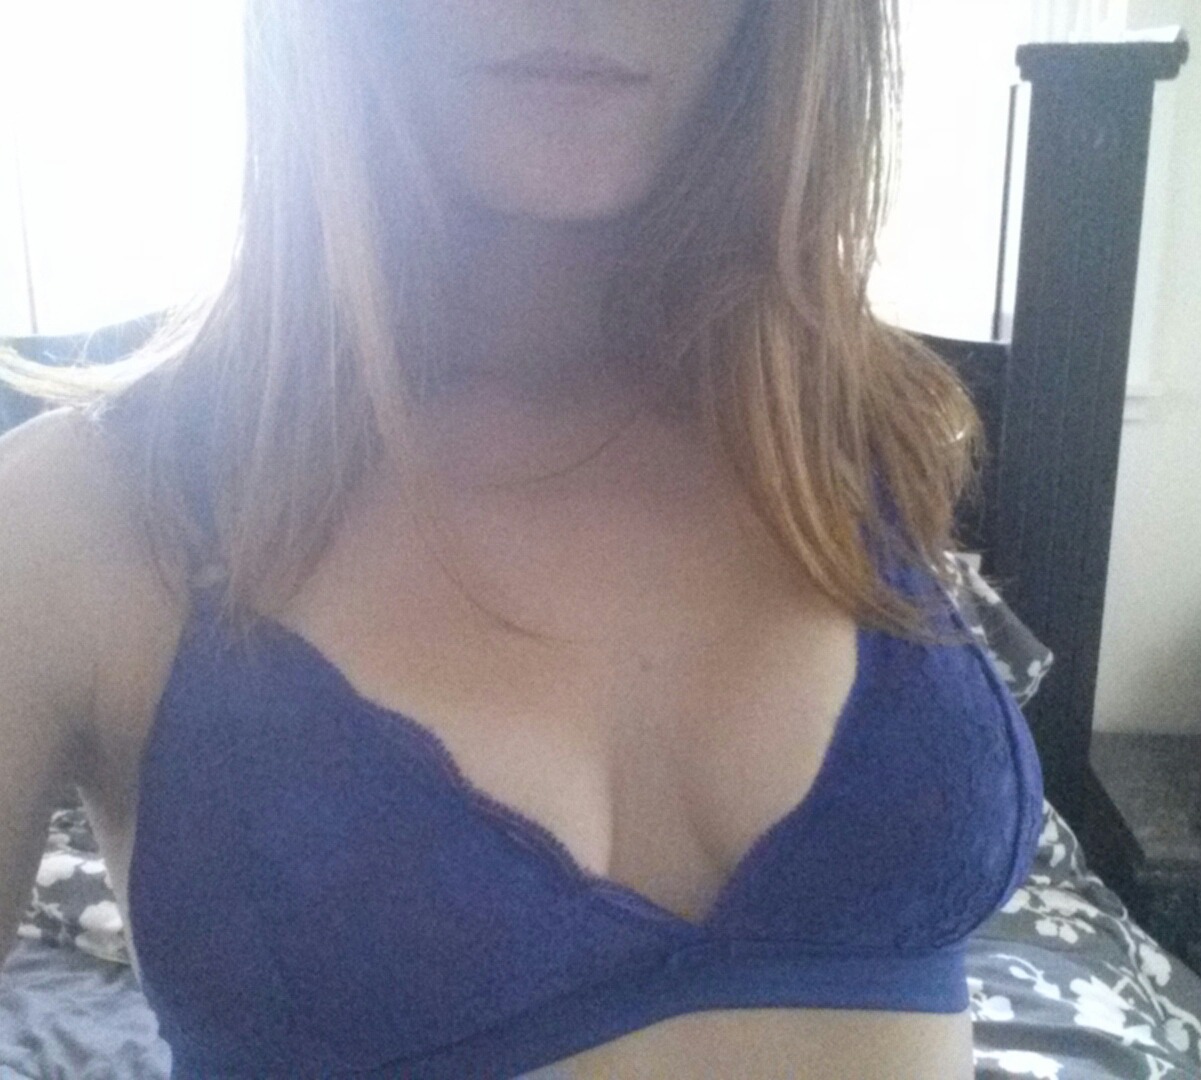 ho-usewife:  Bought myself something cute today! Couldn’t find matching panties